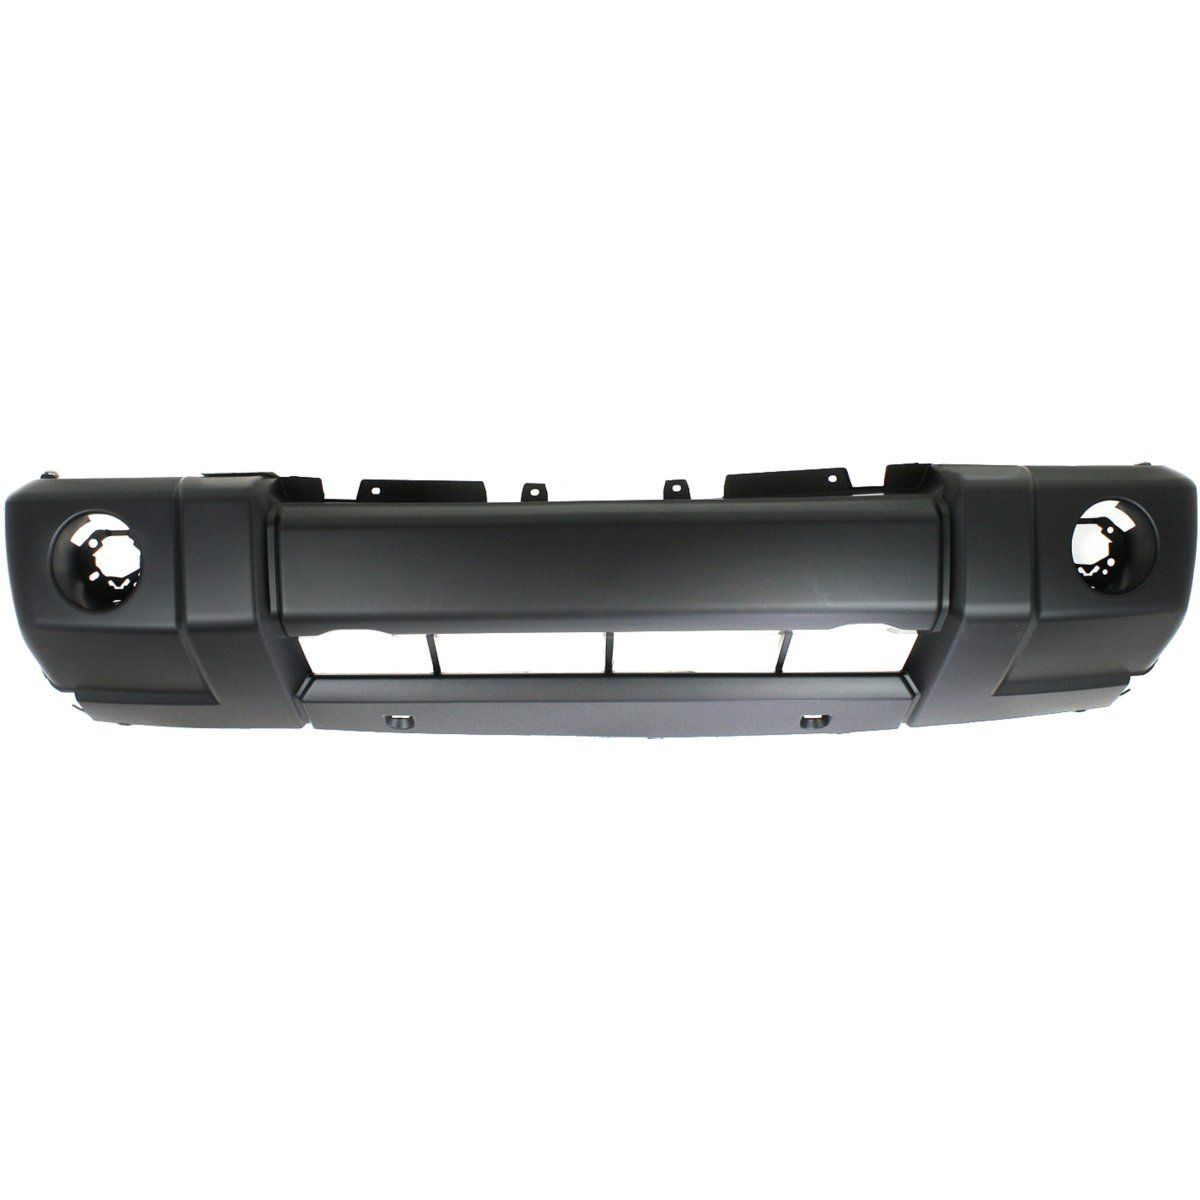 2006-2010 JEEP COMMANDER Front Bumper Cover code X8  w/o bright  w/Fog Lamps Painted to Match